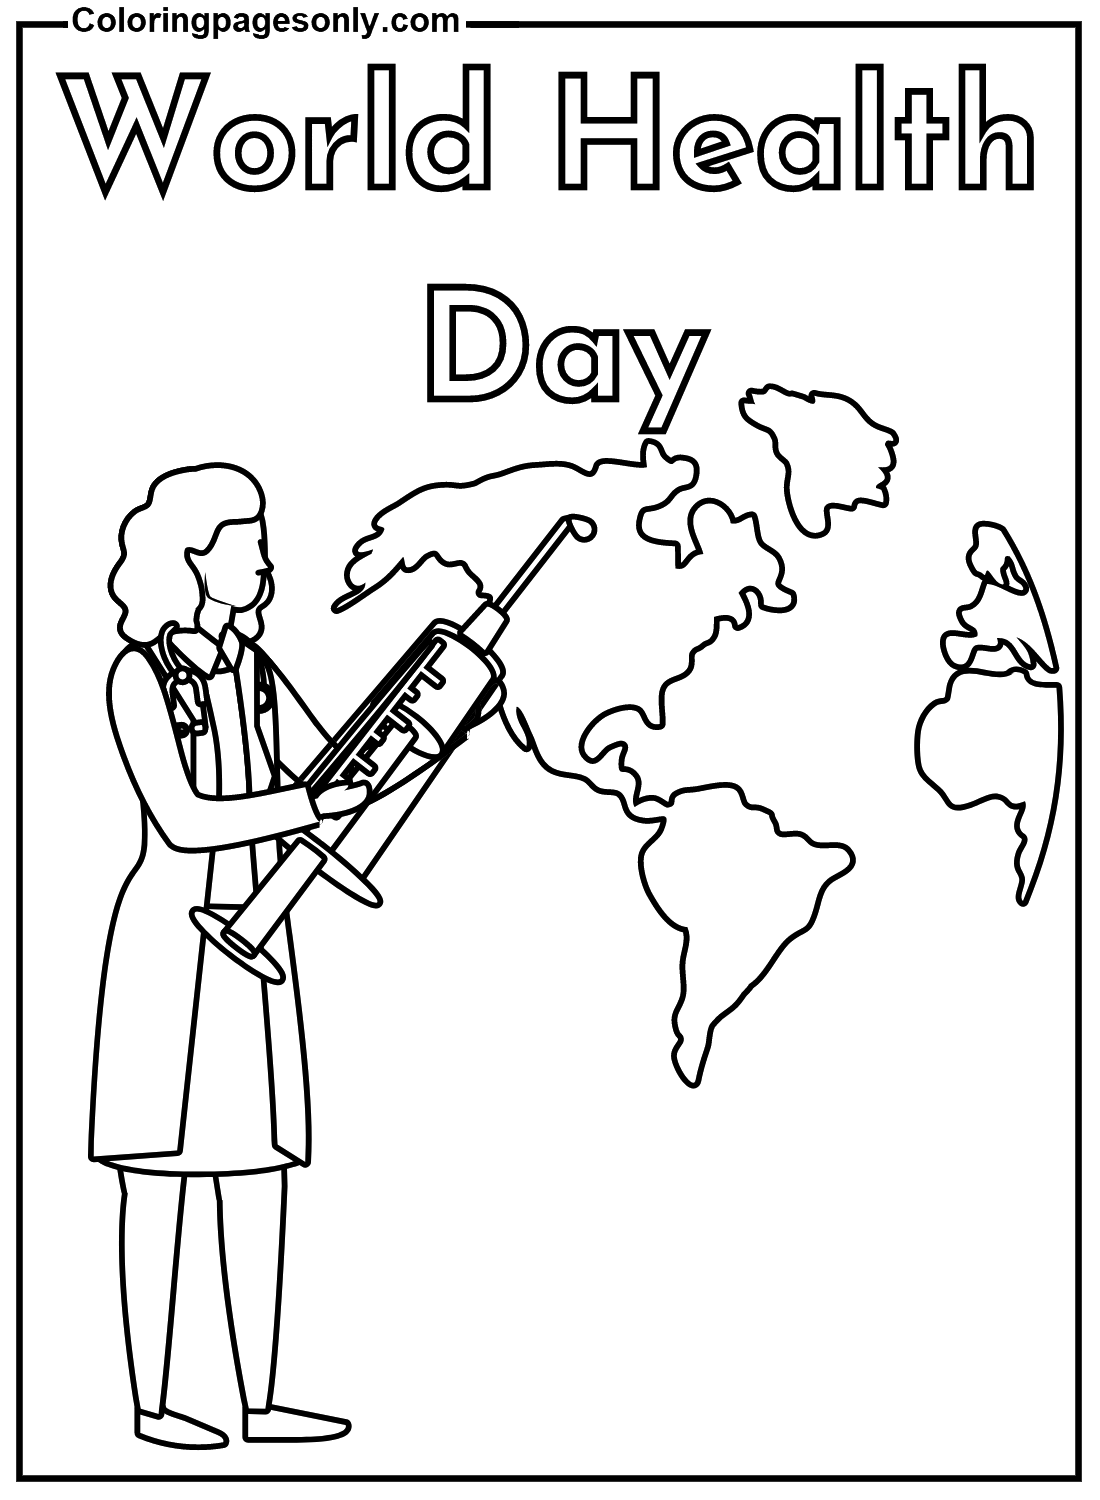 World Health Day to Print Coloring Page